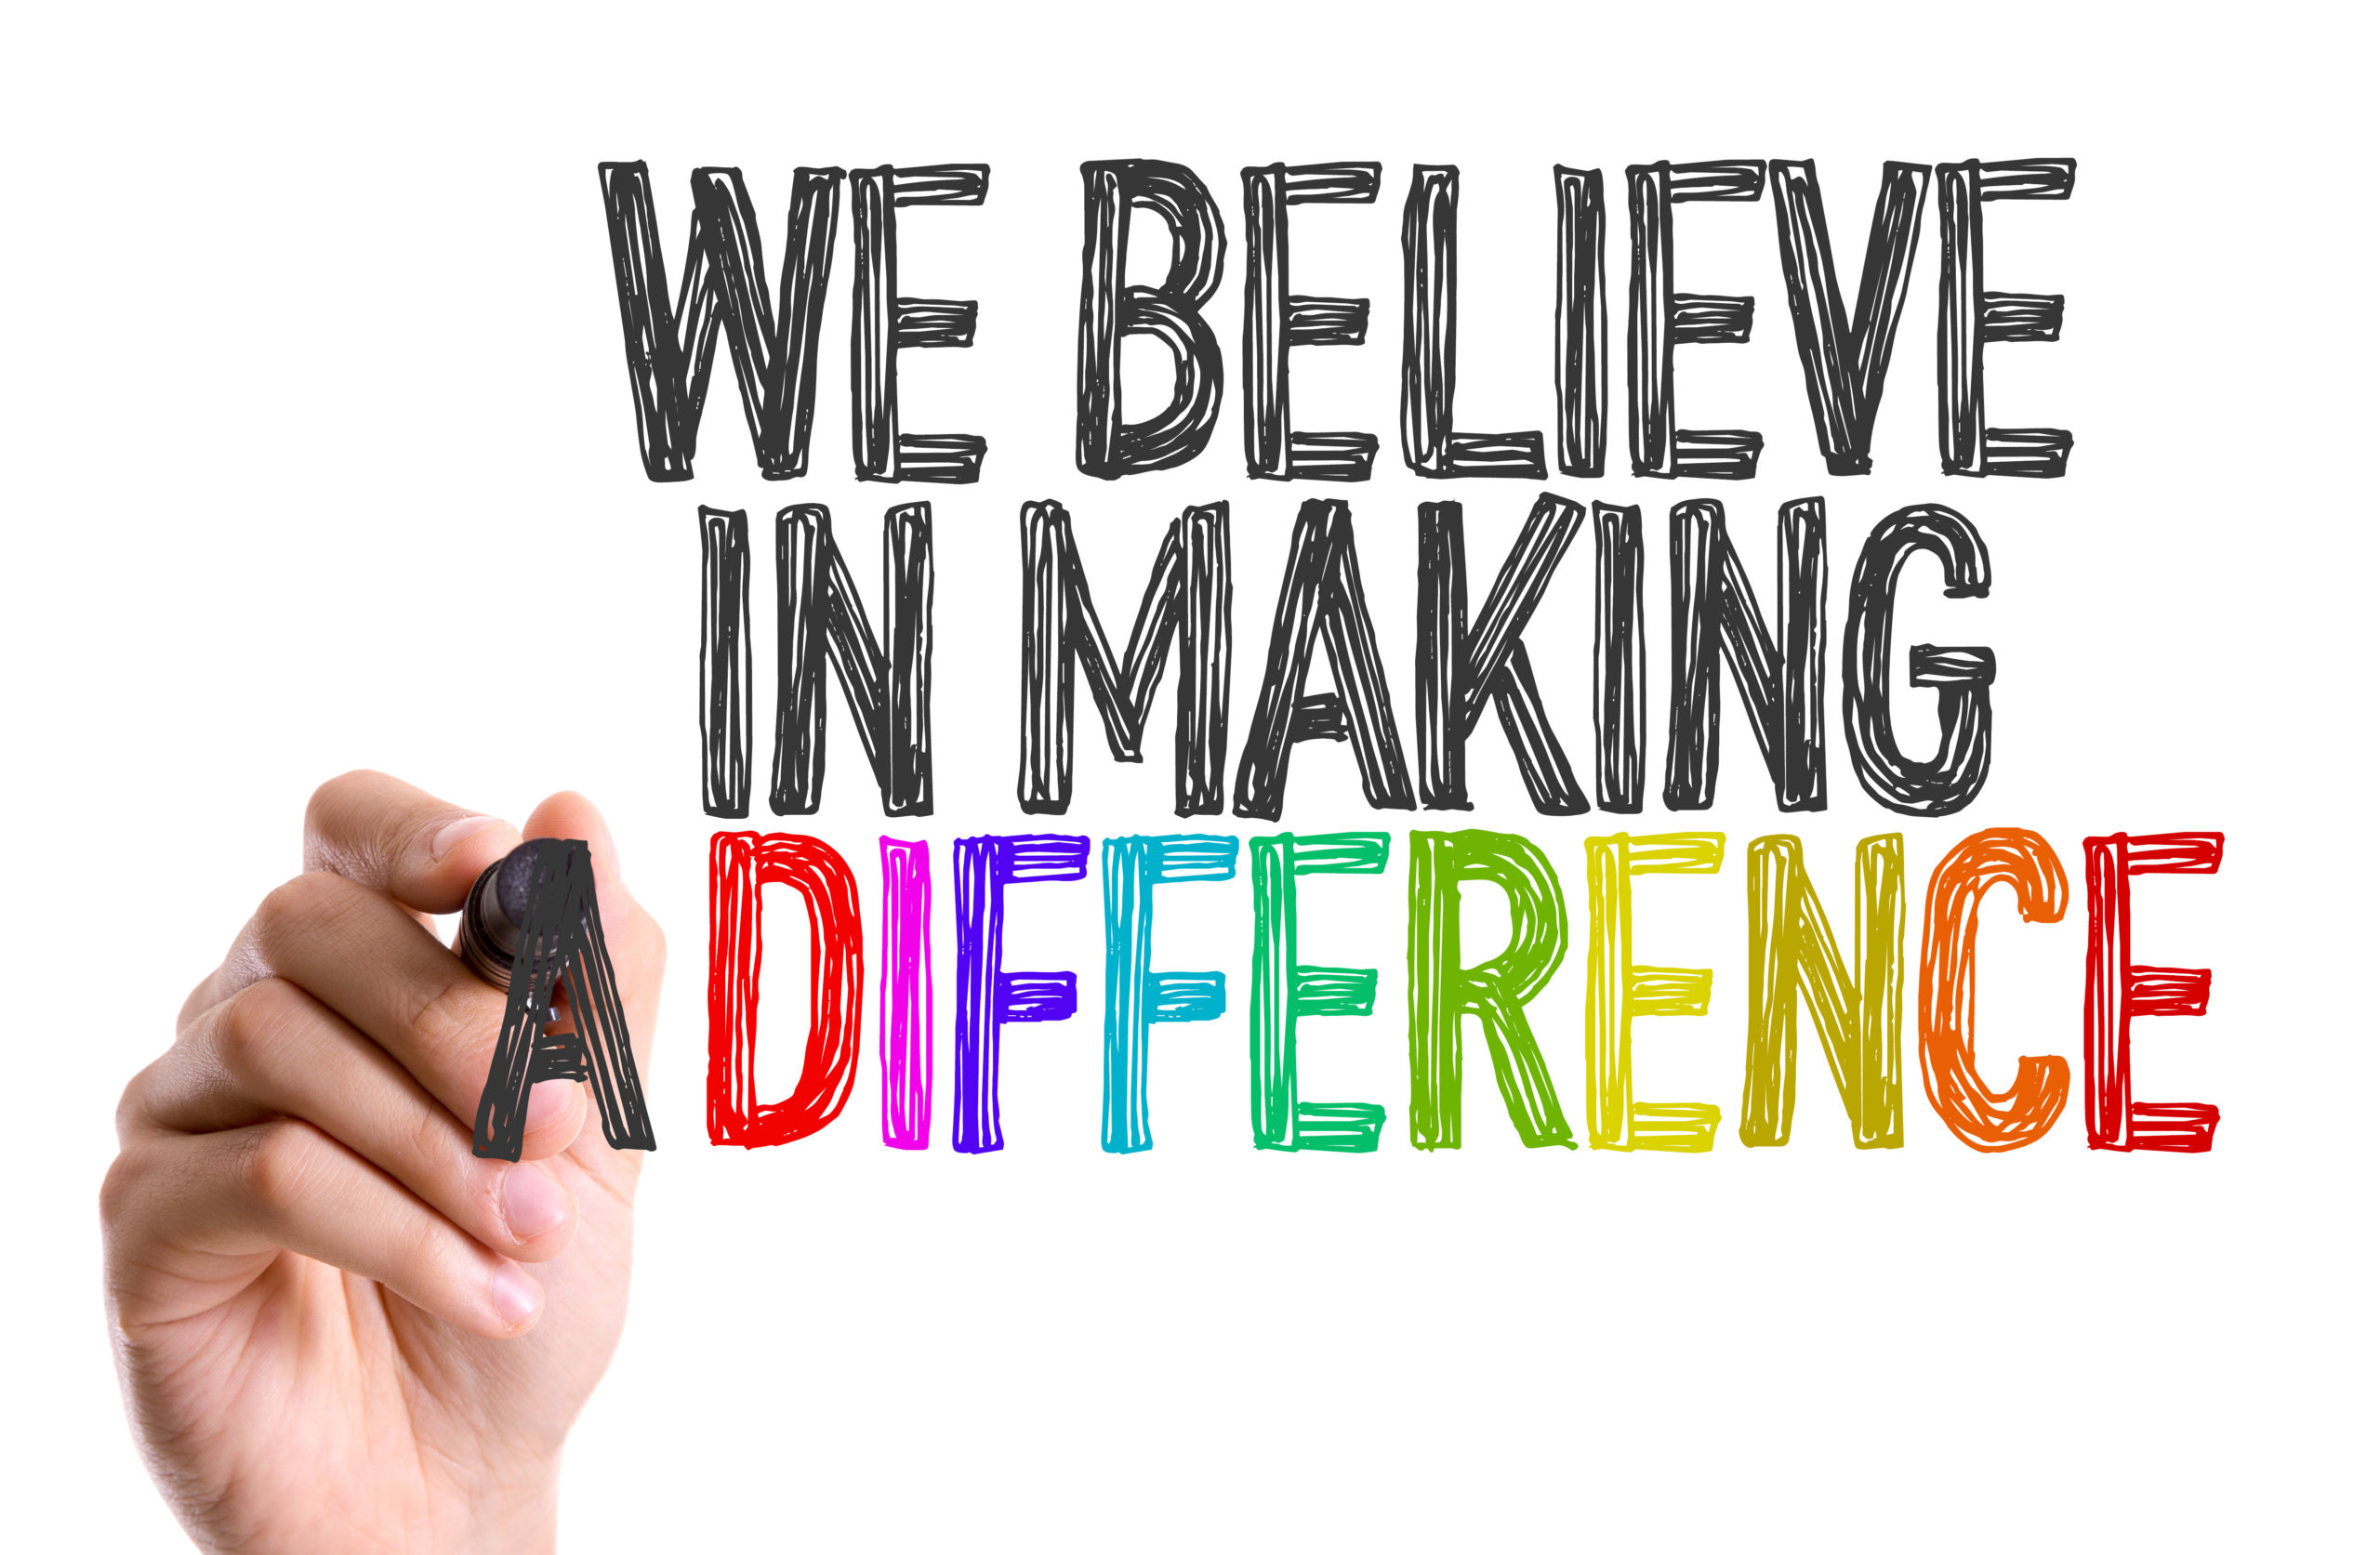 Hand with marker writing: We Believe in Making a Difference